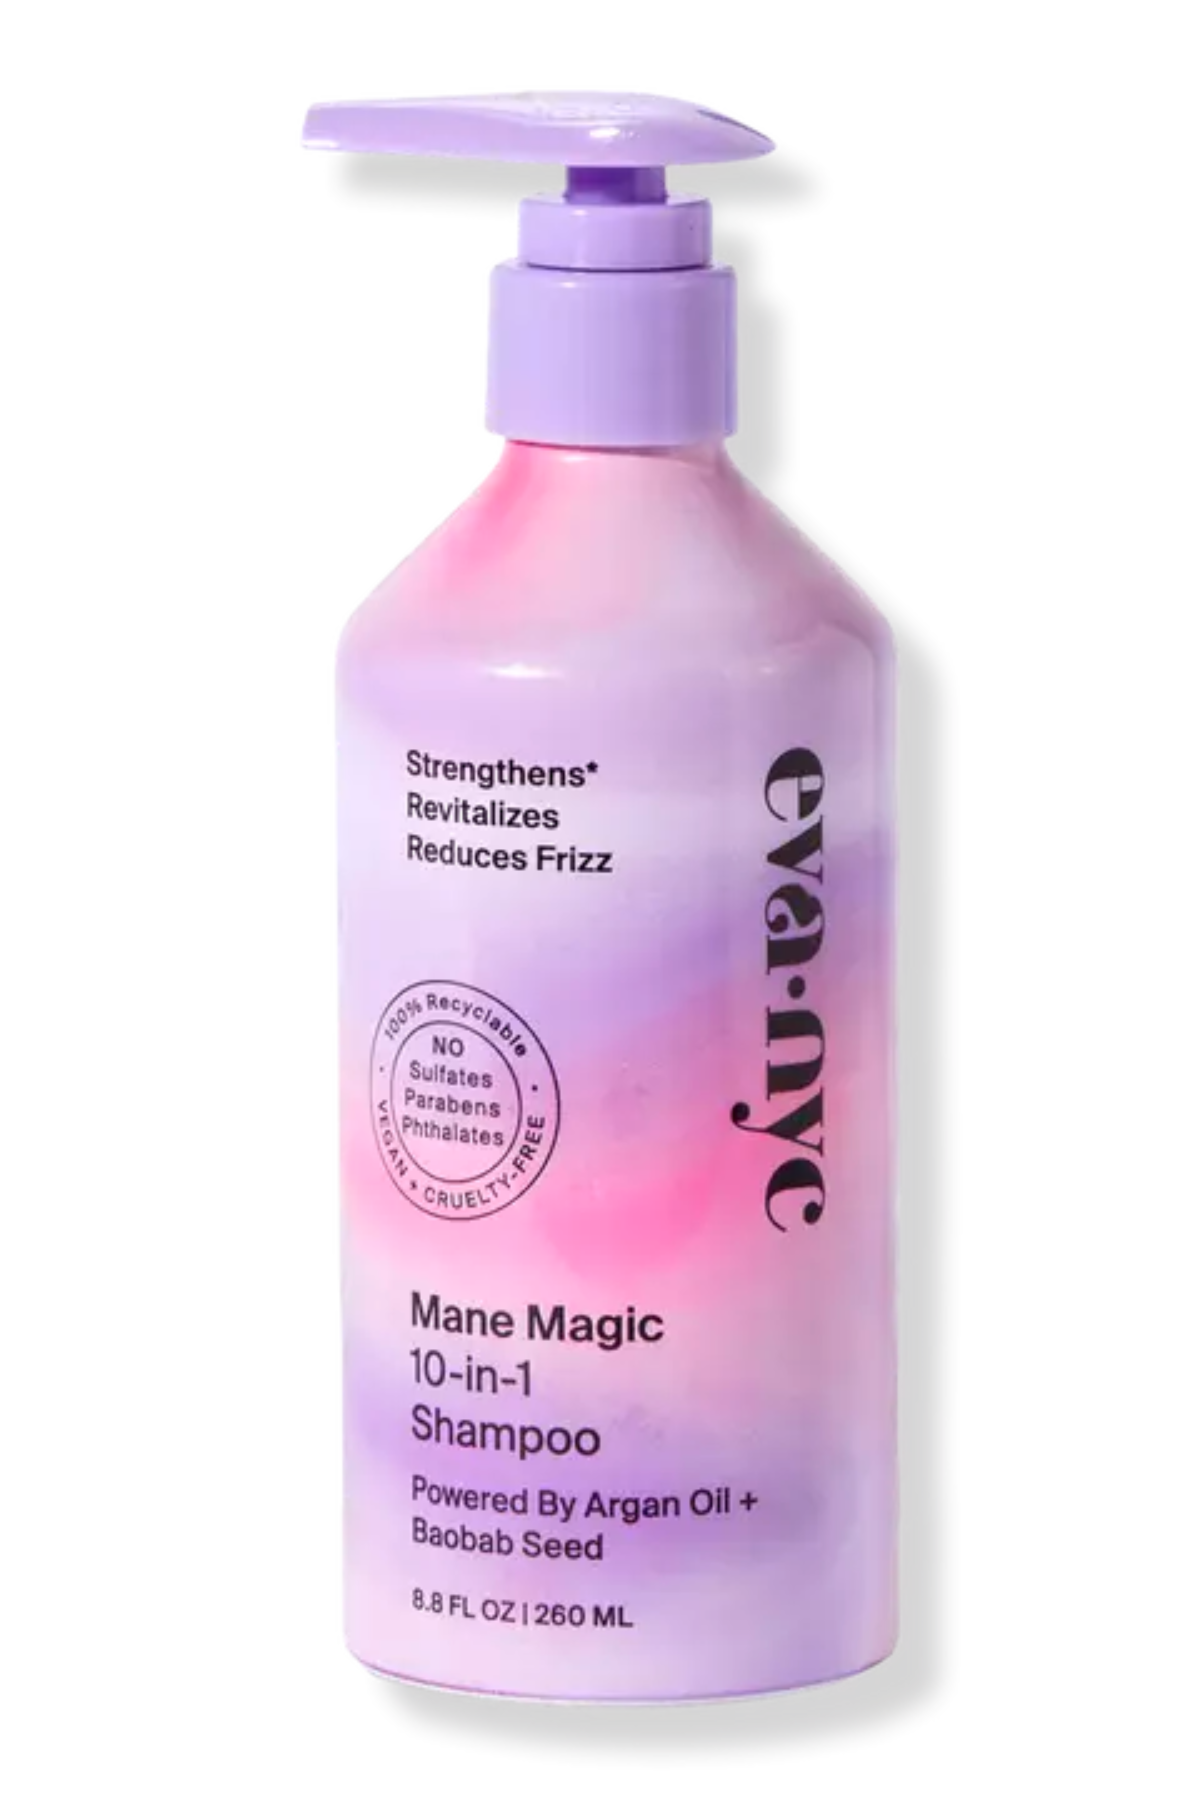 Best Shampoos and Conditioners Reviews | Mane Magic 10-in-1 Shampoo Review 